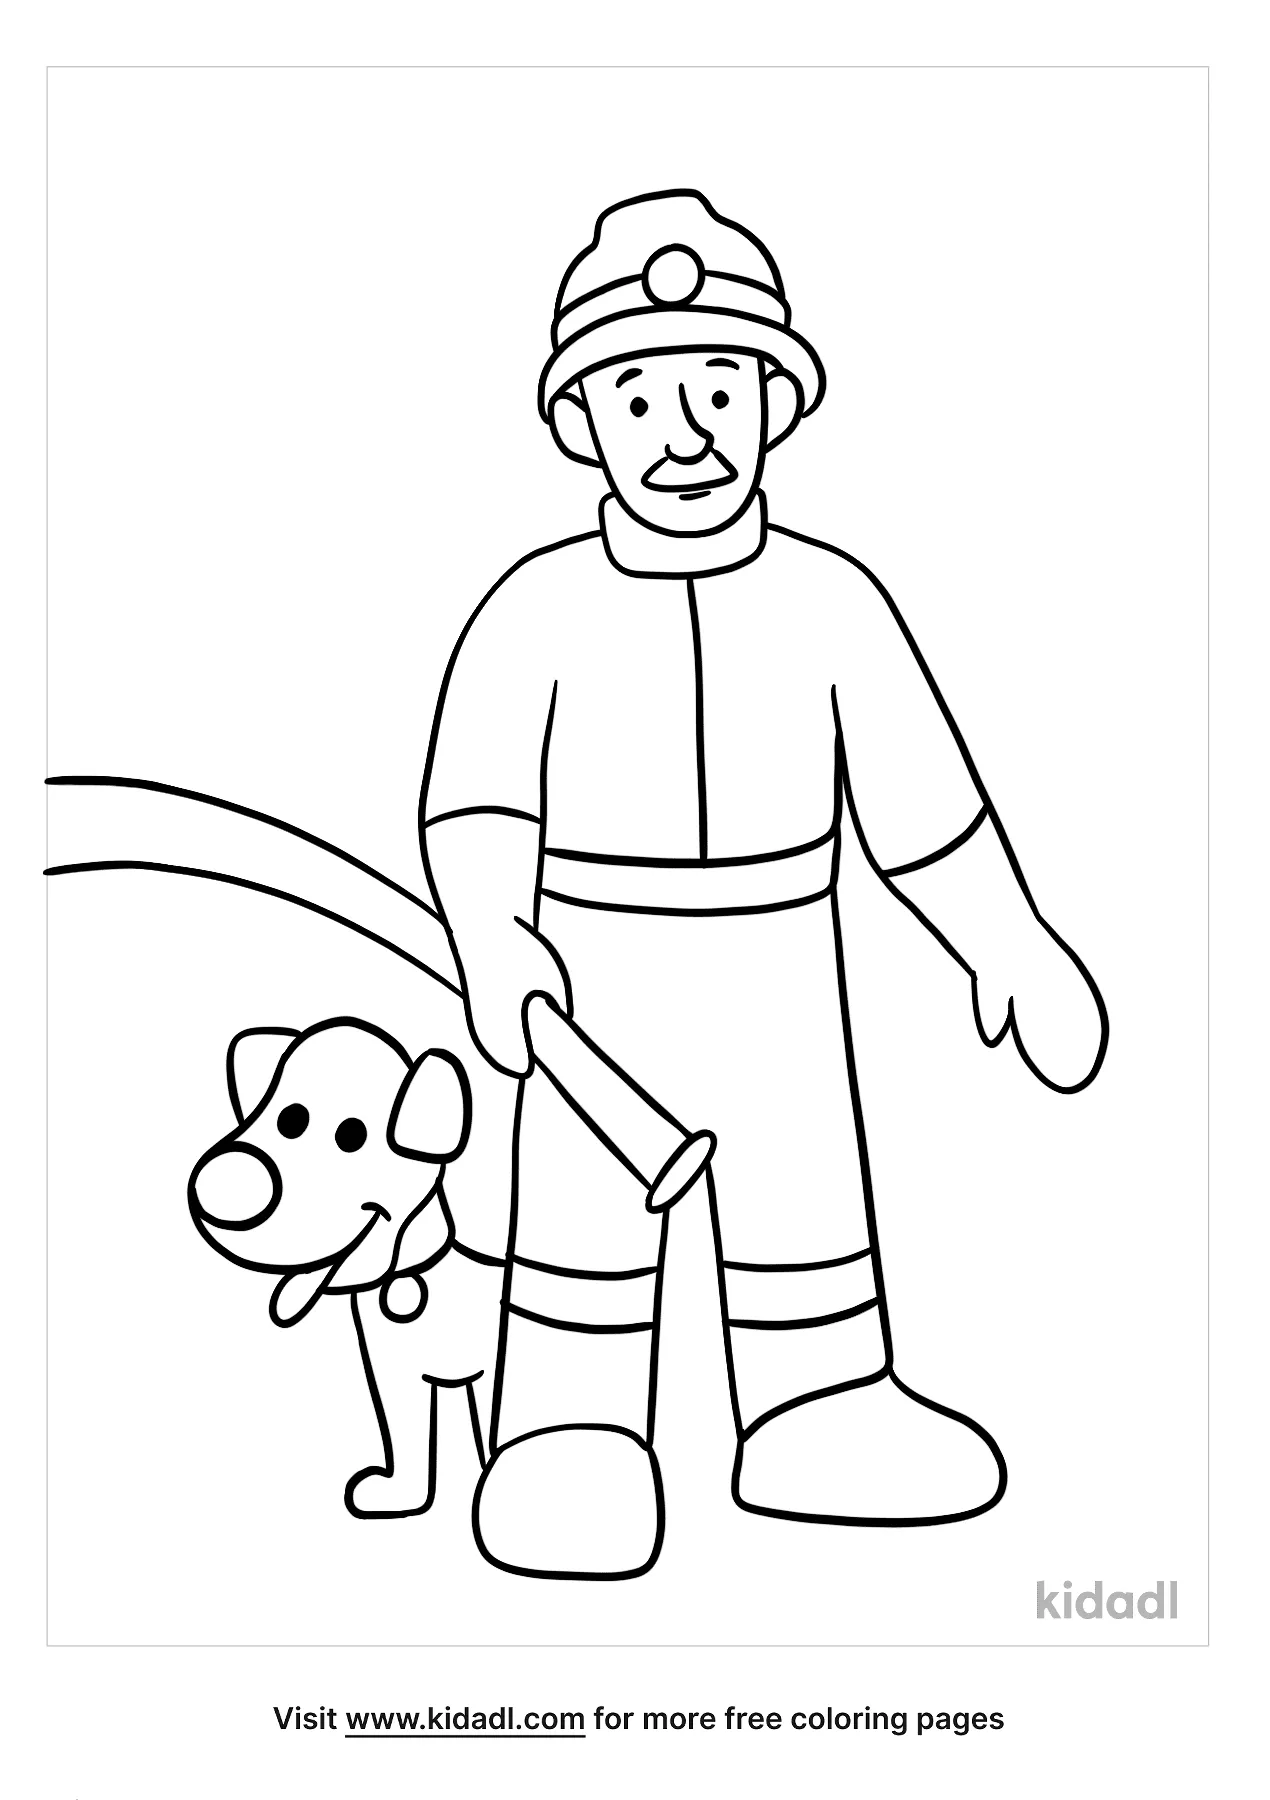 preschool-free-coloring-pages-firemen